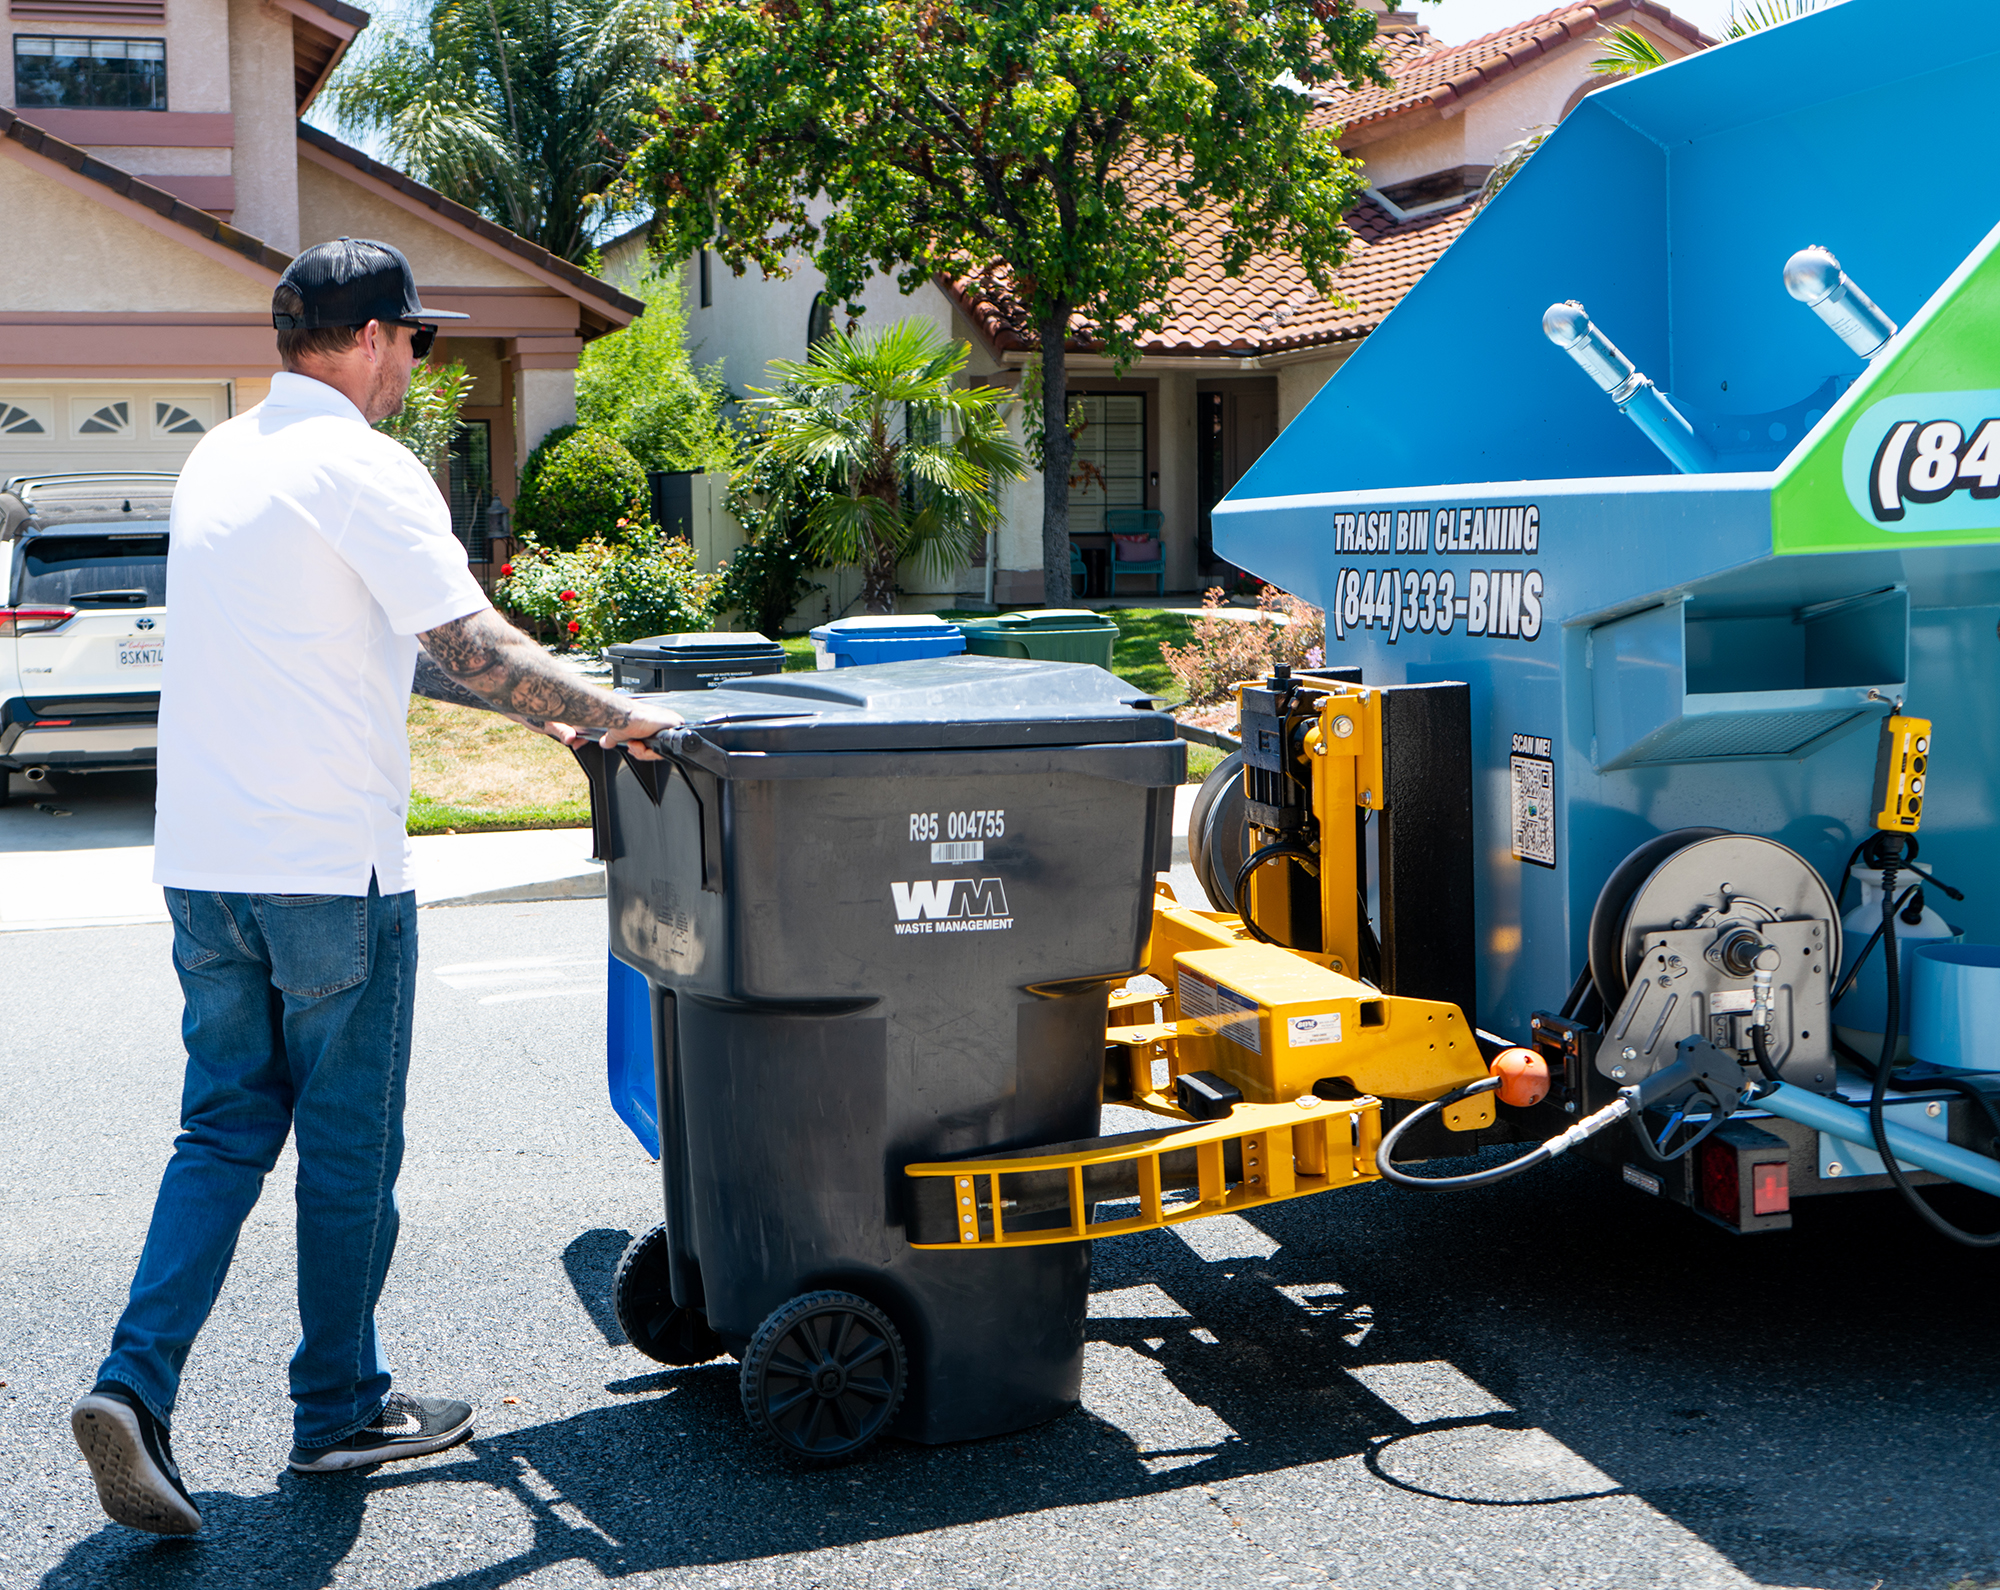 Los Angeles County Trash Can Cleaning Service